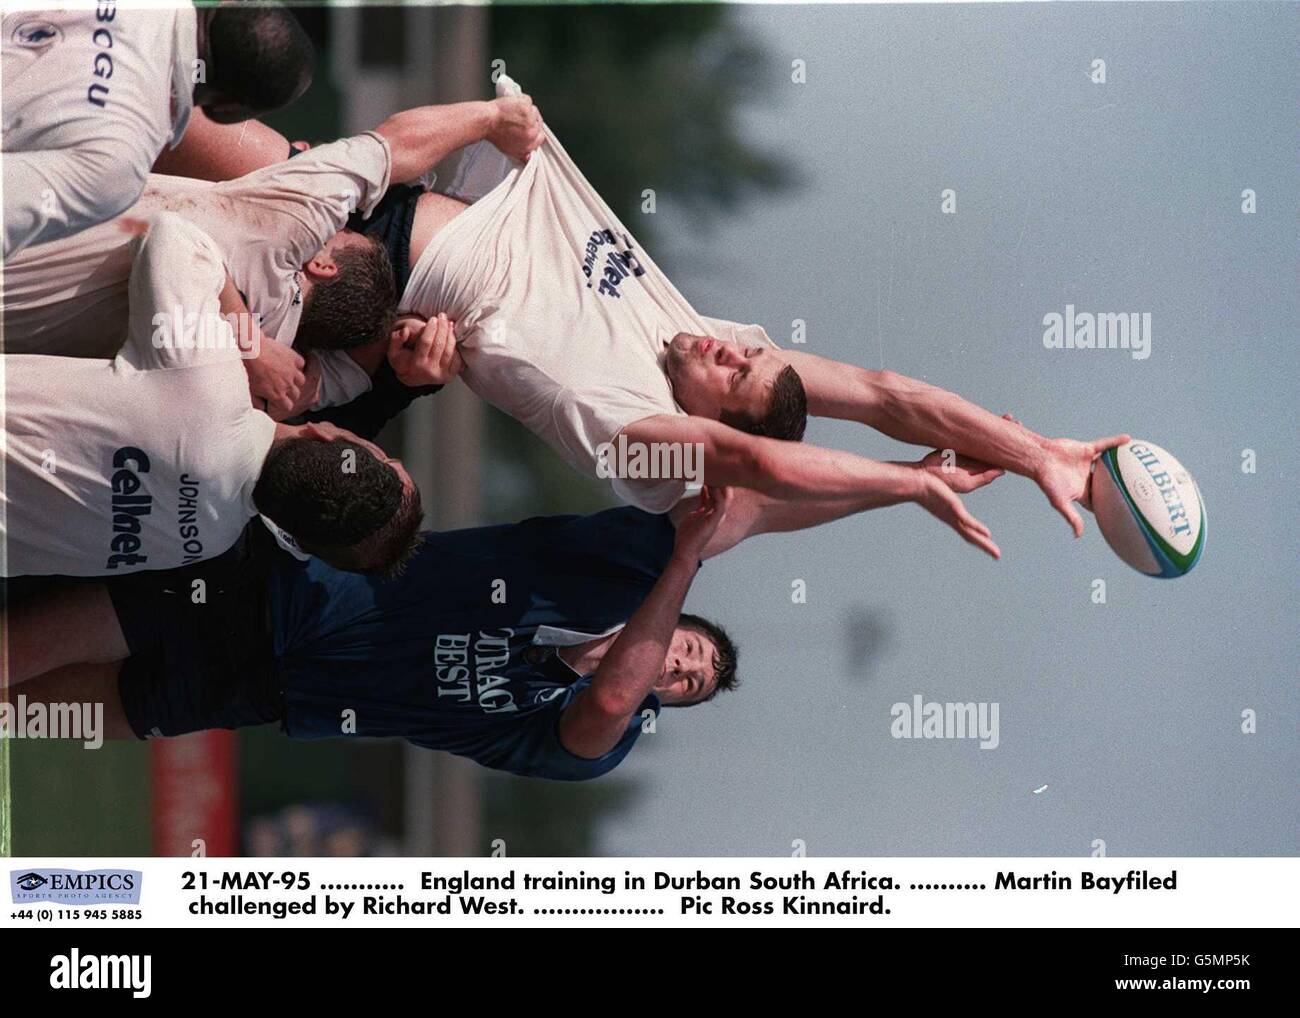 21-MAY-95 ........... England training in Durban South Africa. .......... Martin Bayfield challenged by Richard West Stock Photo